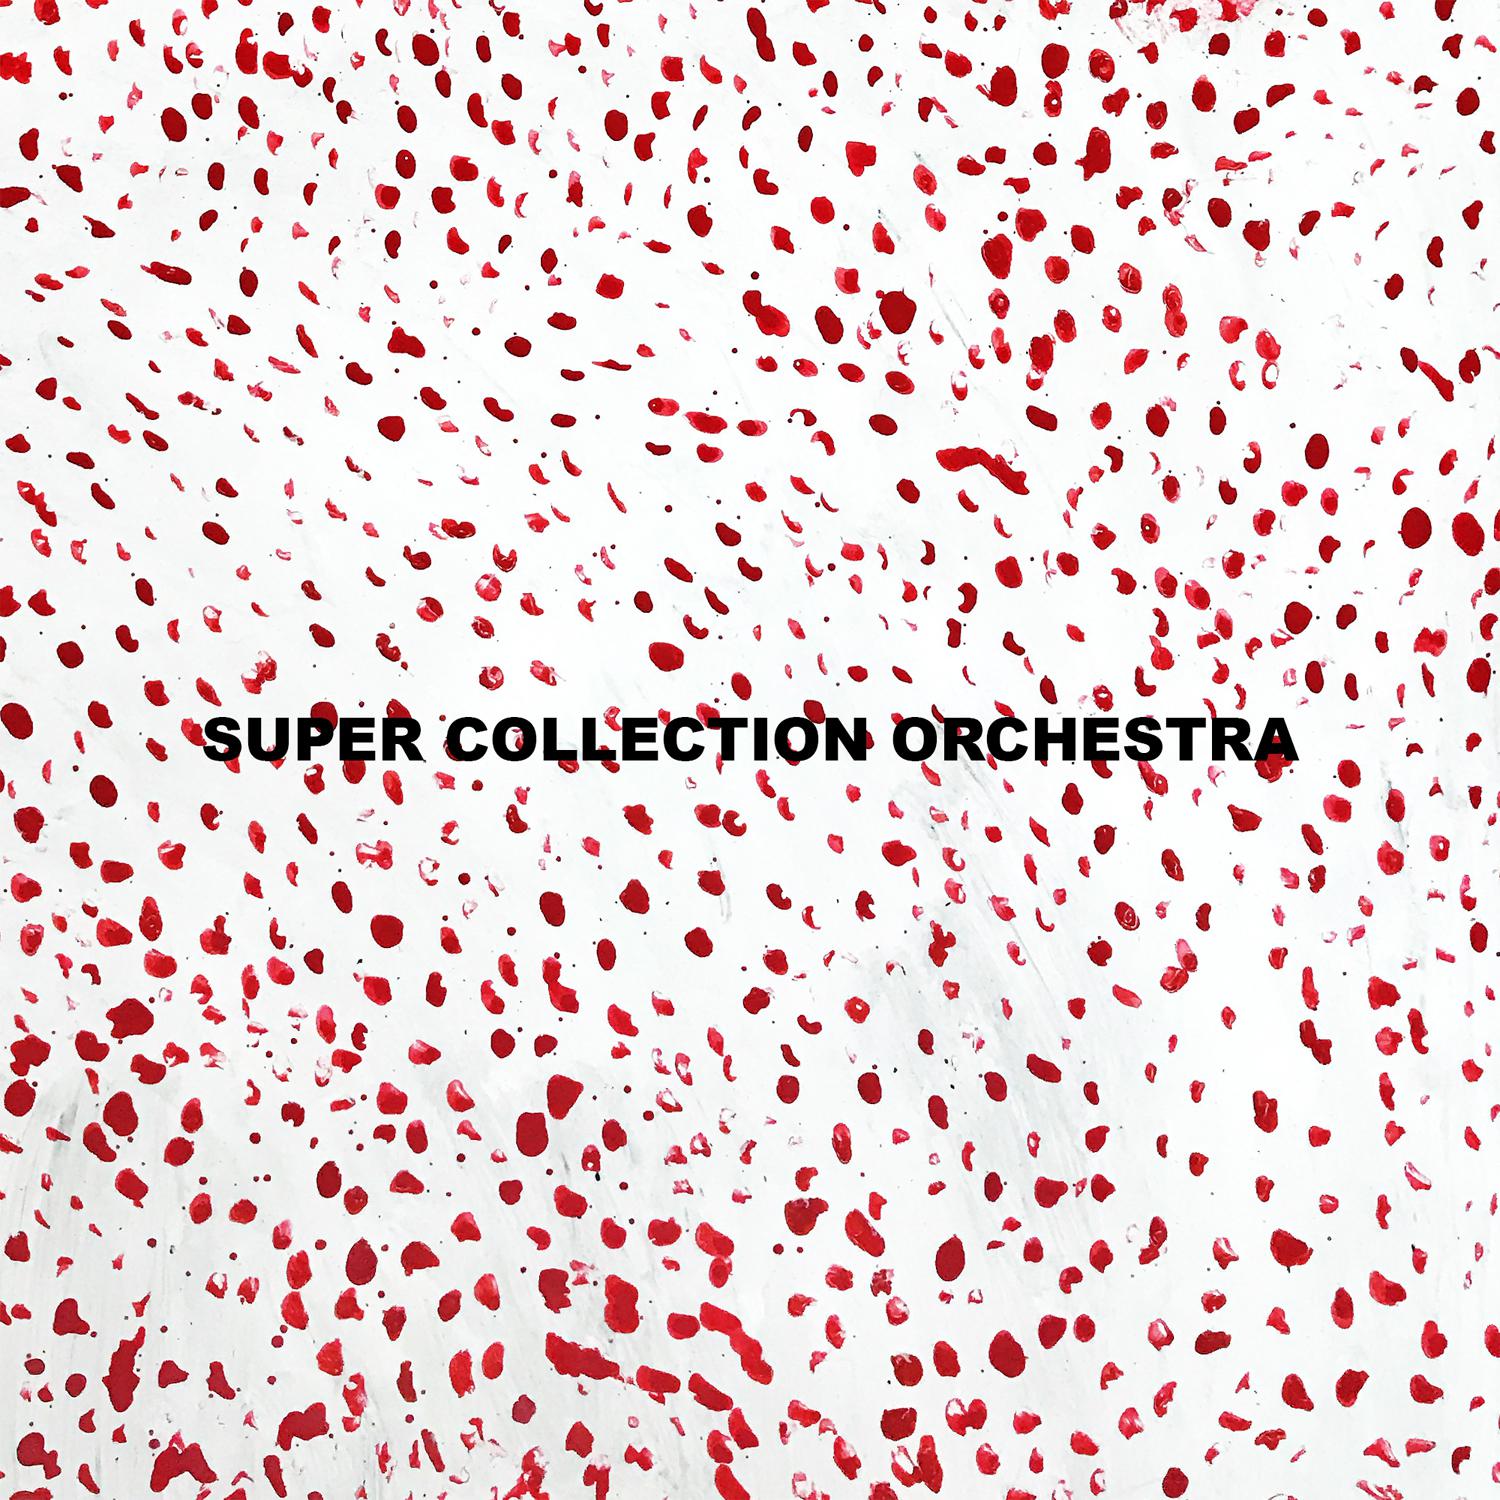 Orchestra collection. Super collection Orchestra. Punk Pink Rabbit.